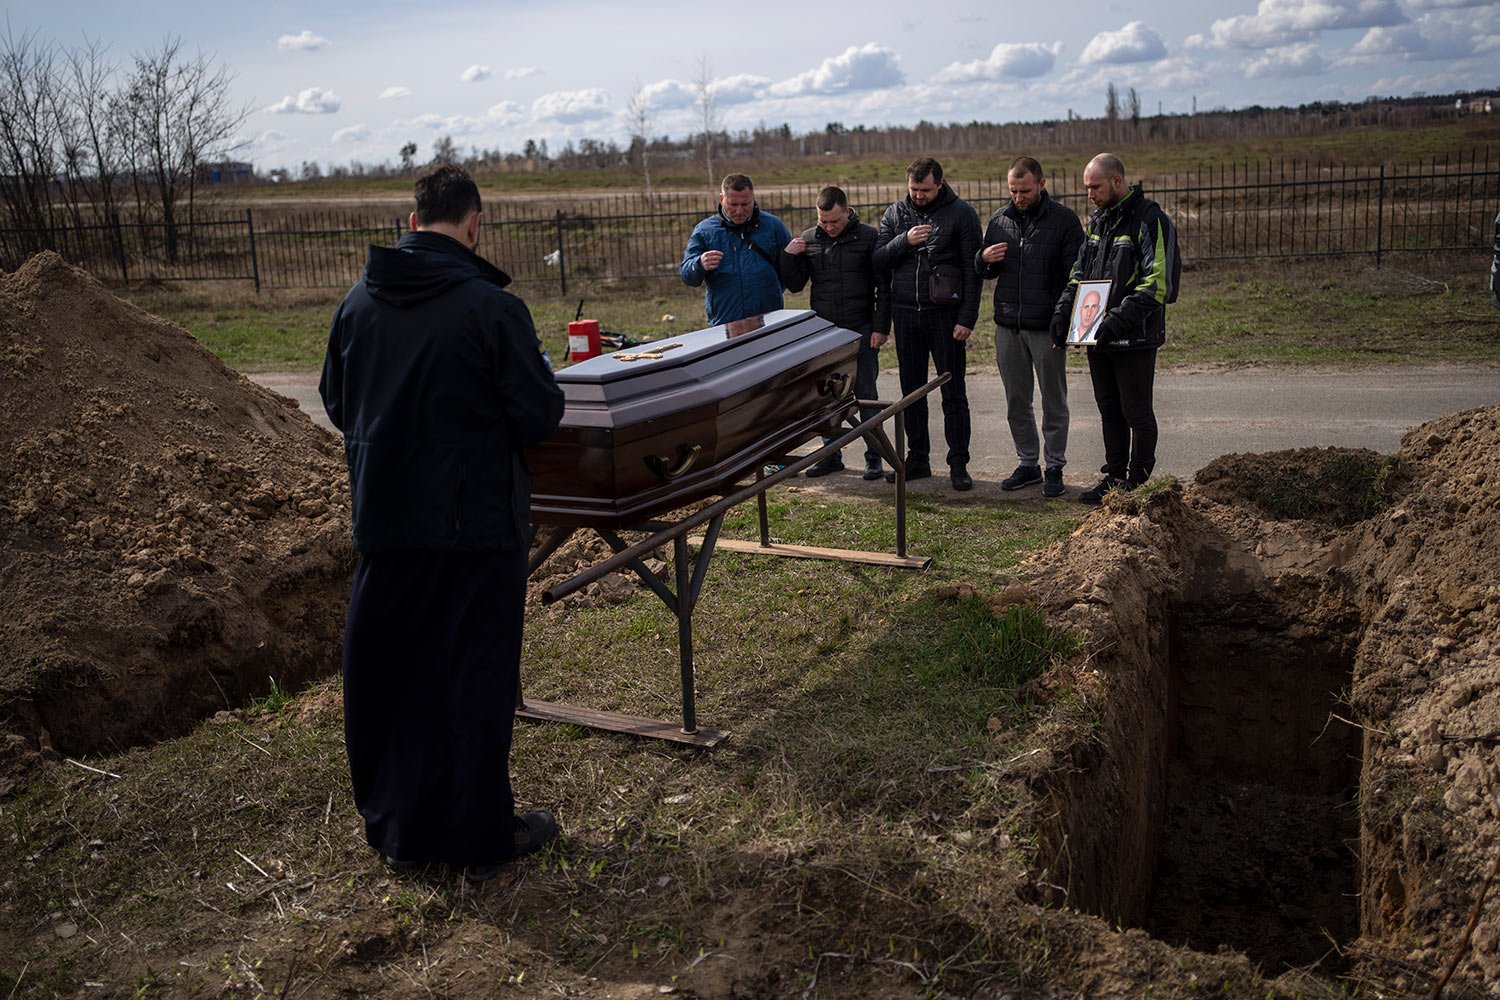  Relatives and friends attend the funeral of Andriy Matviychuk, 37, who served as territorial defense soldier, and was captured and killed by Russian army in Bucha, on the outskirts of Kyiv, Ukraine, Tuesday, April 12, 2022. (AP Photo/Rodrigo Abd) 